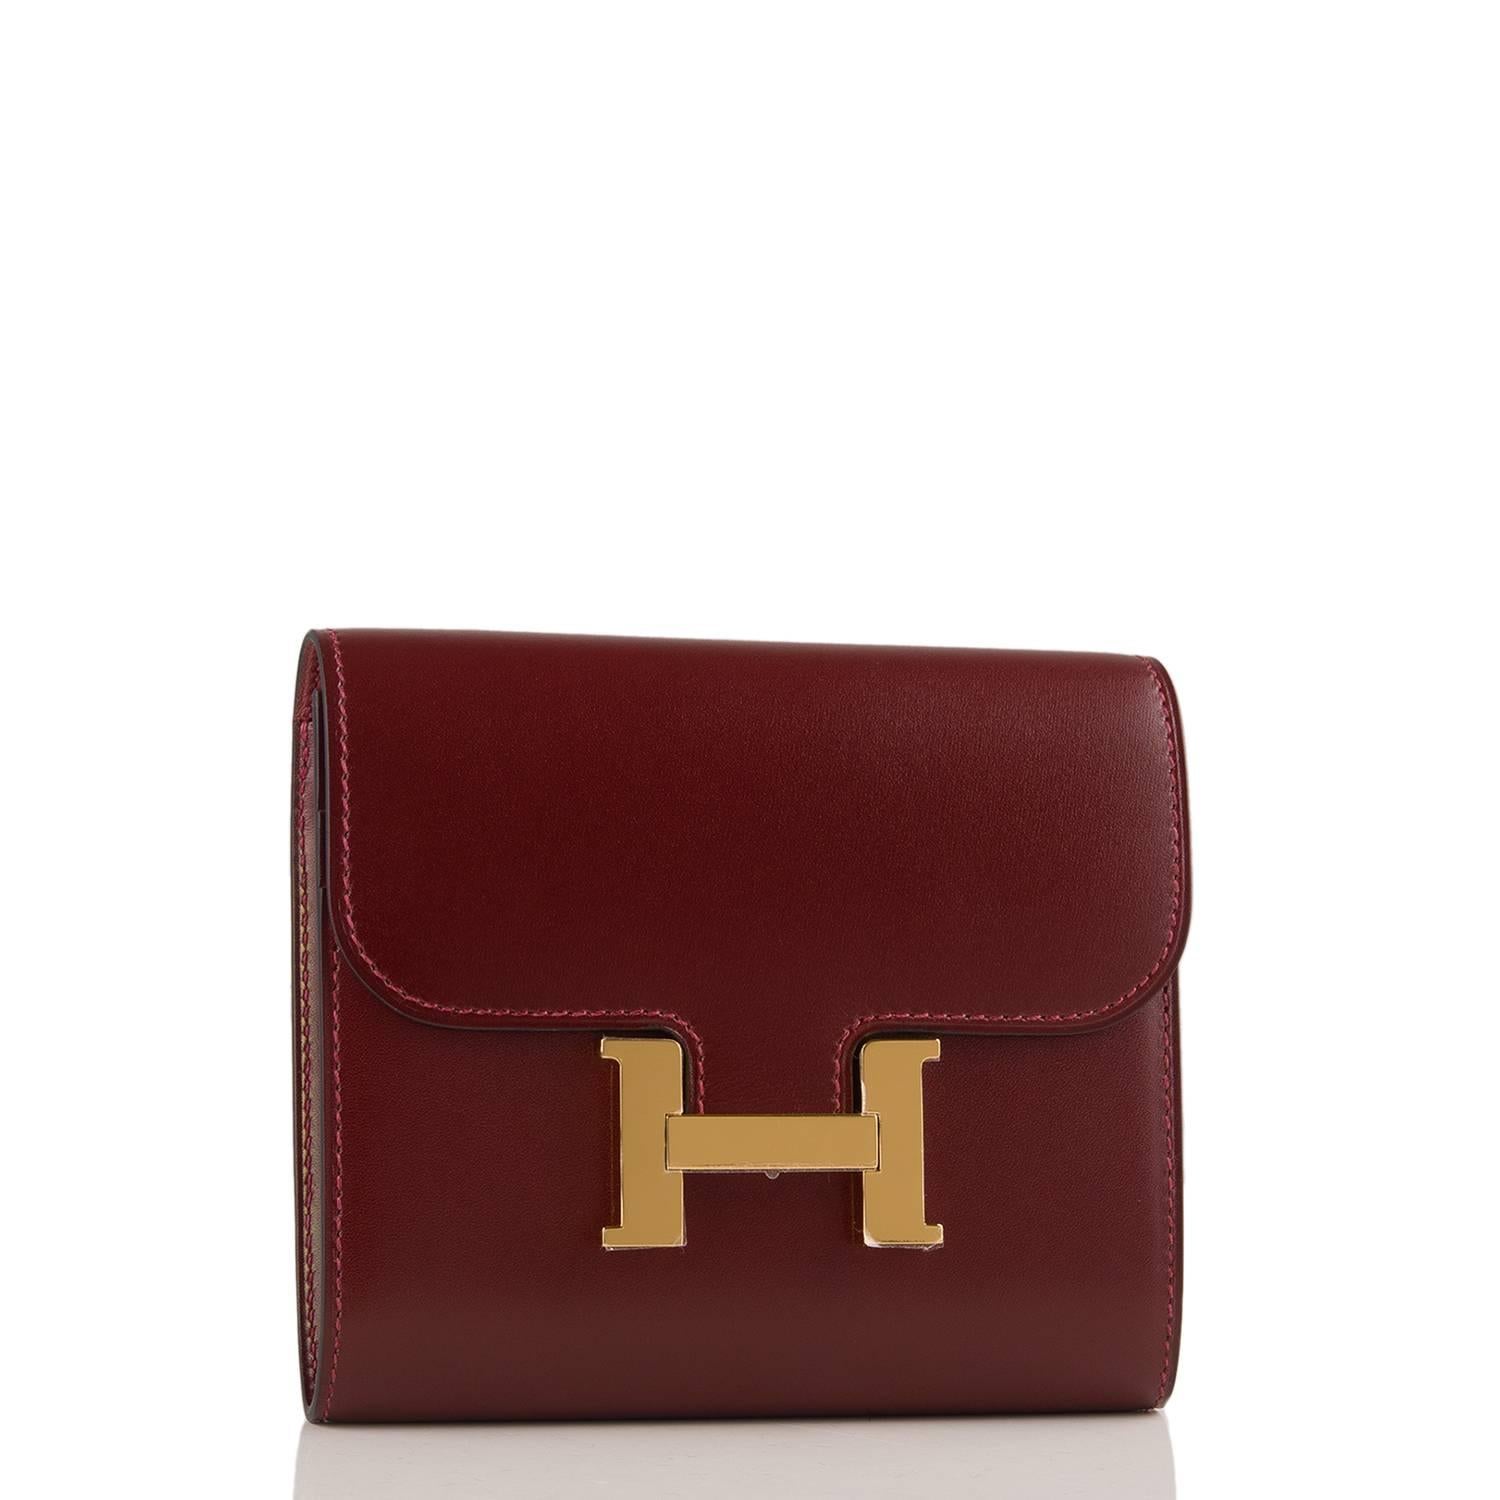 Hermes Rouge H Constance Long Wallet of box leather with gold hardware.

This compact wallet has tonal stitching, a metal 